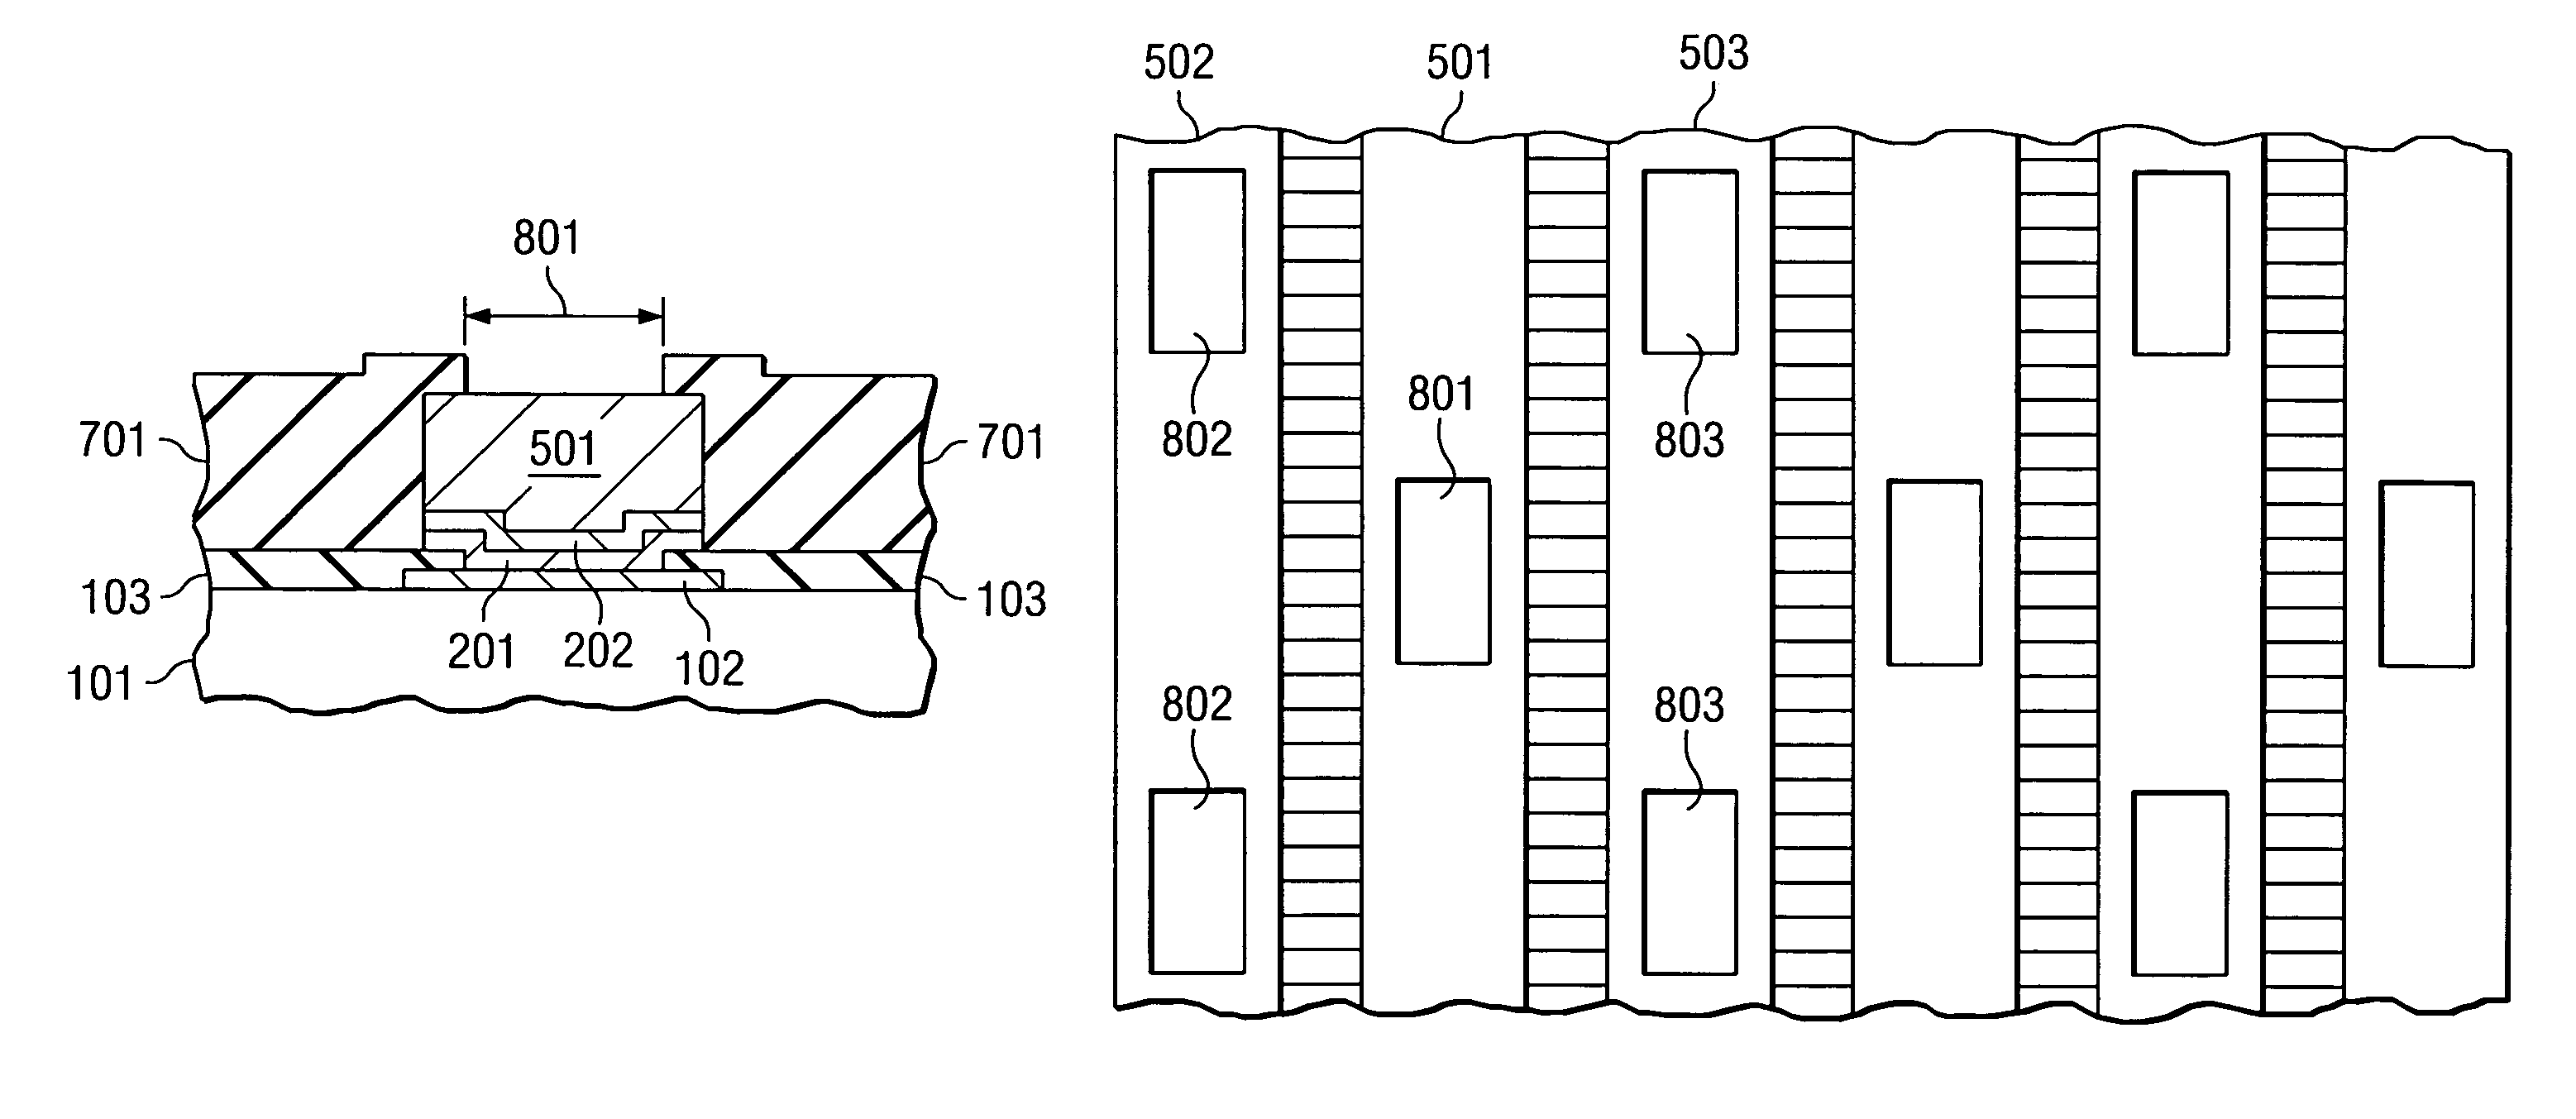 Method for fabricating low resistance, low inductance interconnections in high current semiconductor devices